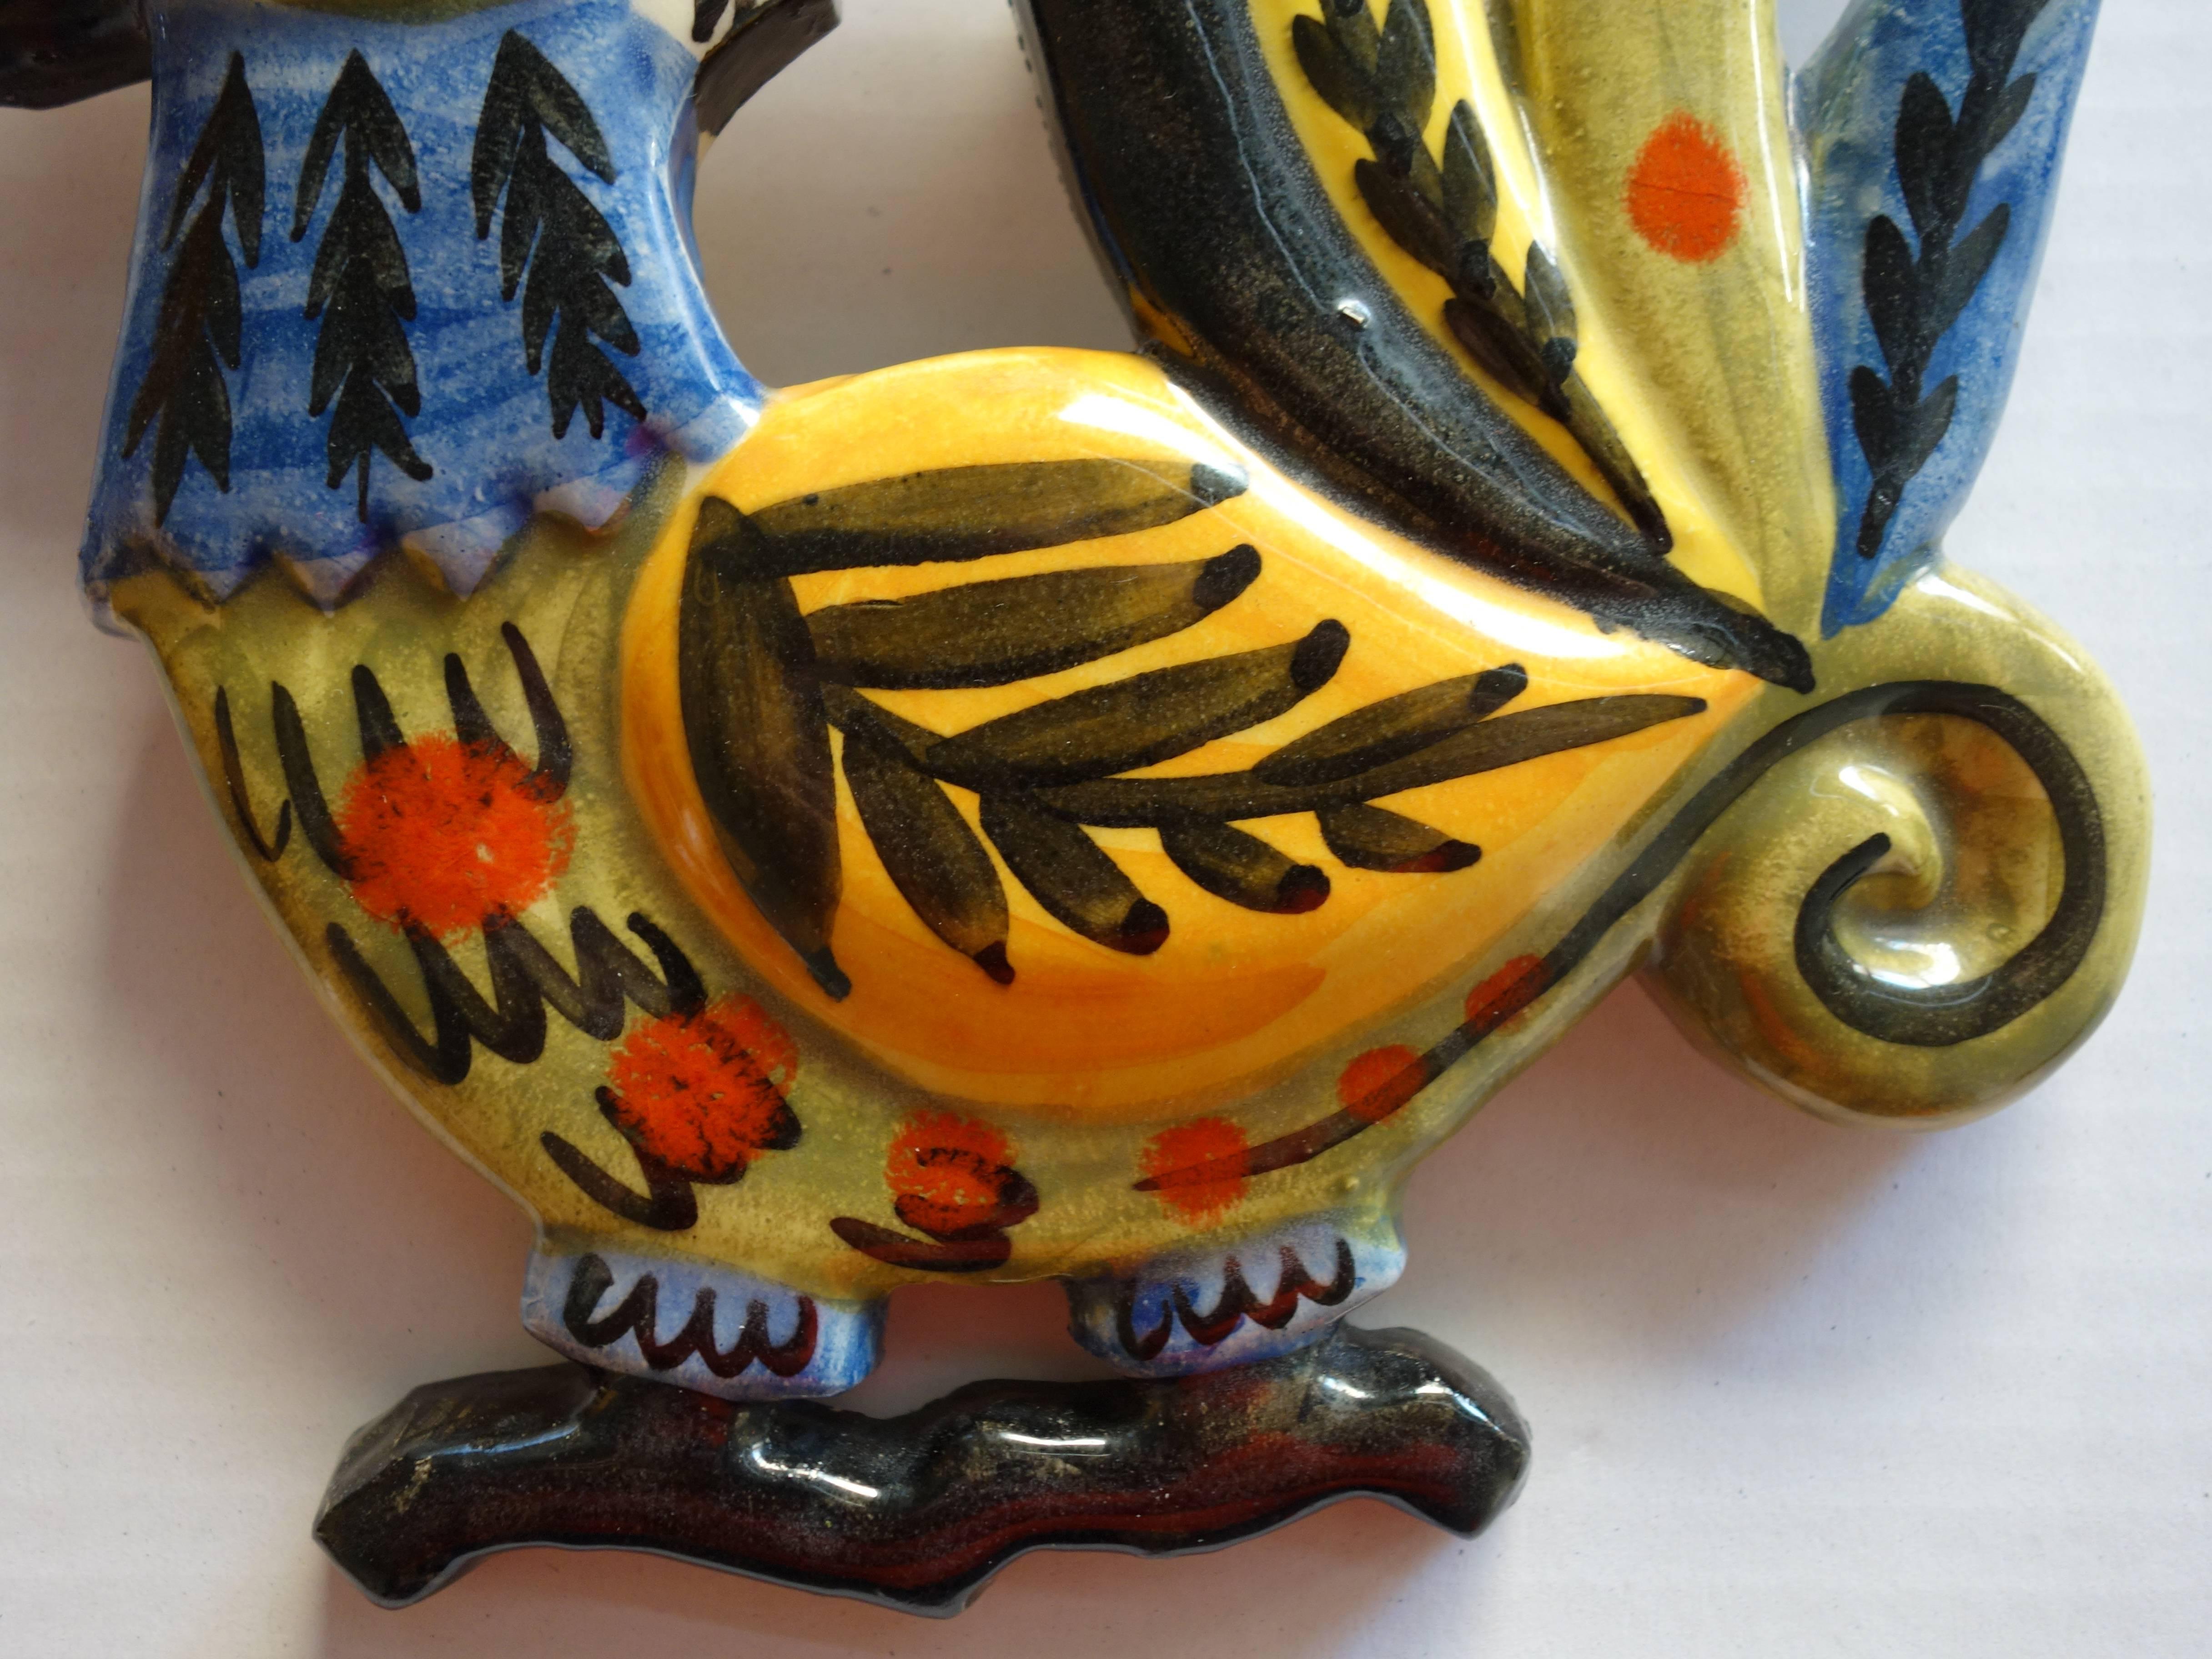 Traditional Brittany Rooster - Original handsigned ceramic - Gray Figurative Sculpture by Gwen Jégou